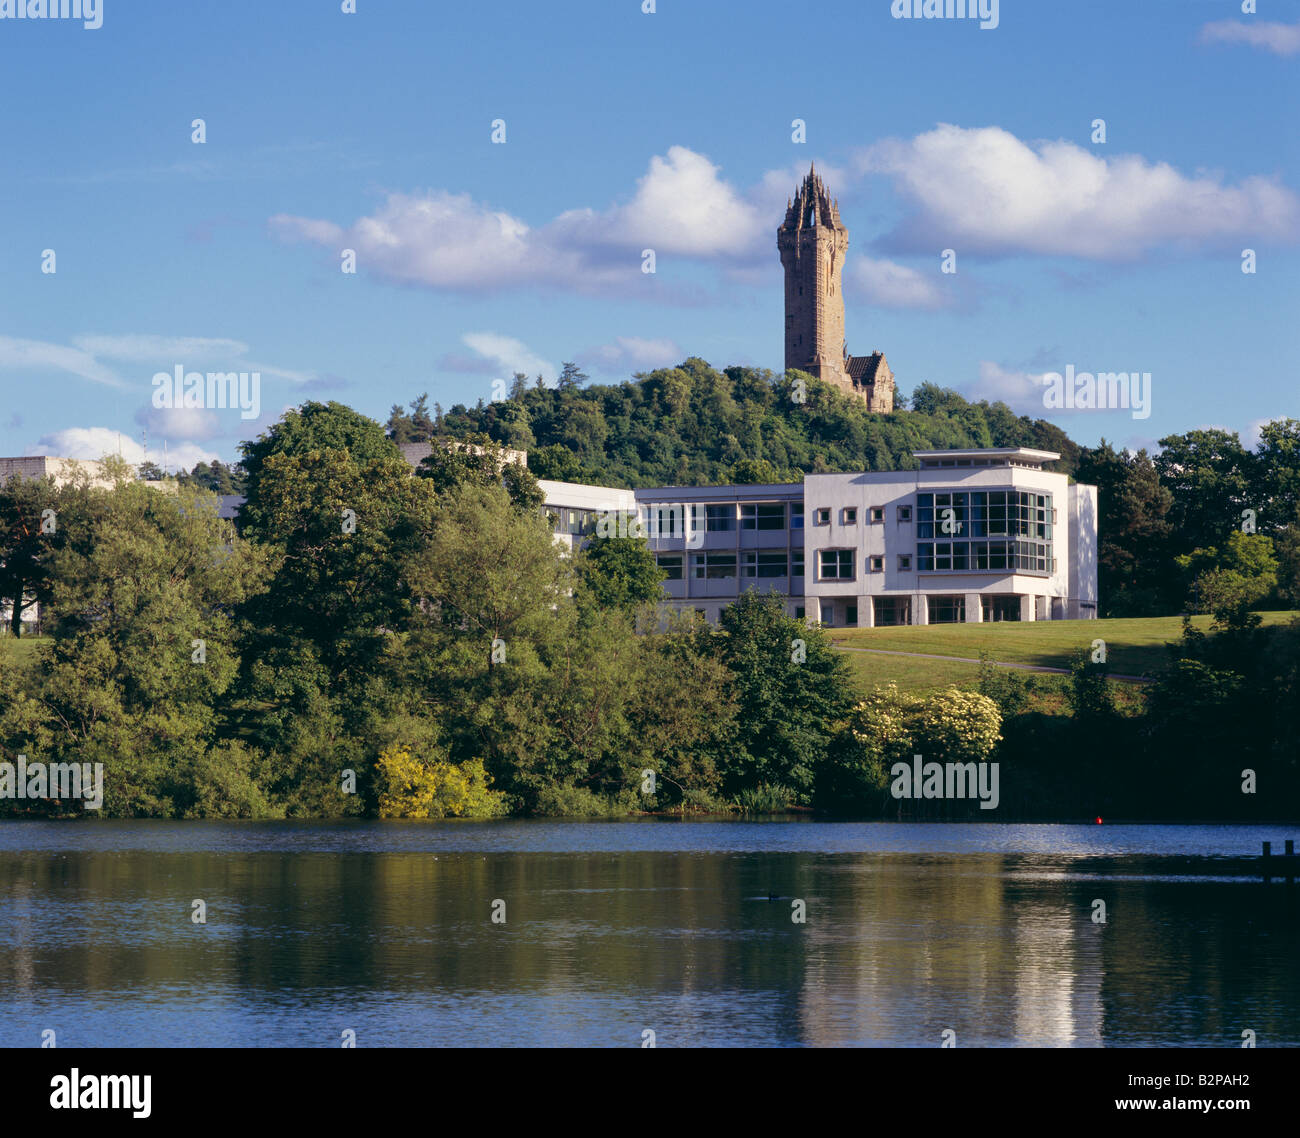 The Wallace Monument and the Cottrell building of Stirling University, City of Stirling, Scotland, UK Stock Photo